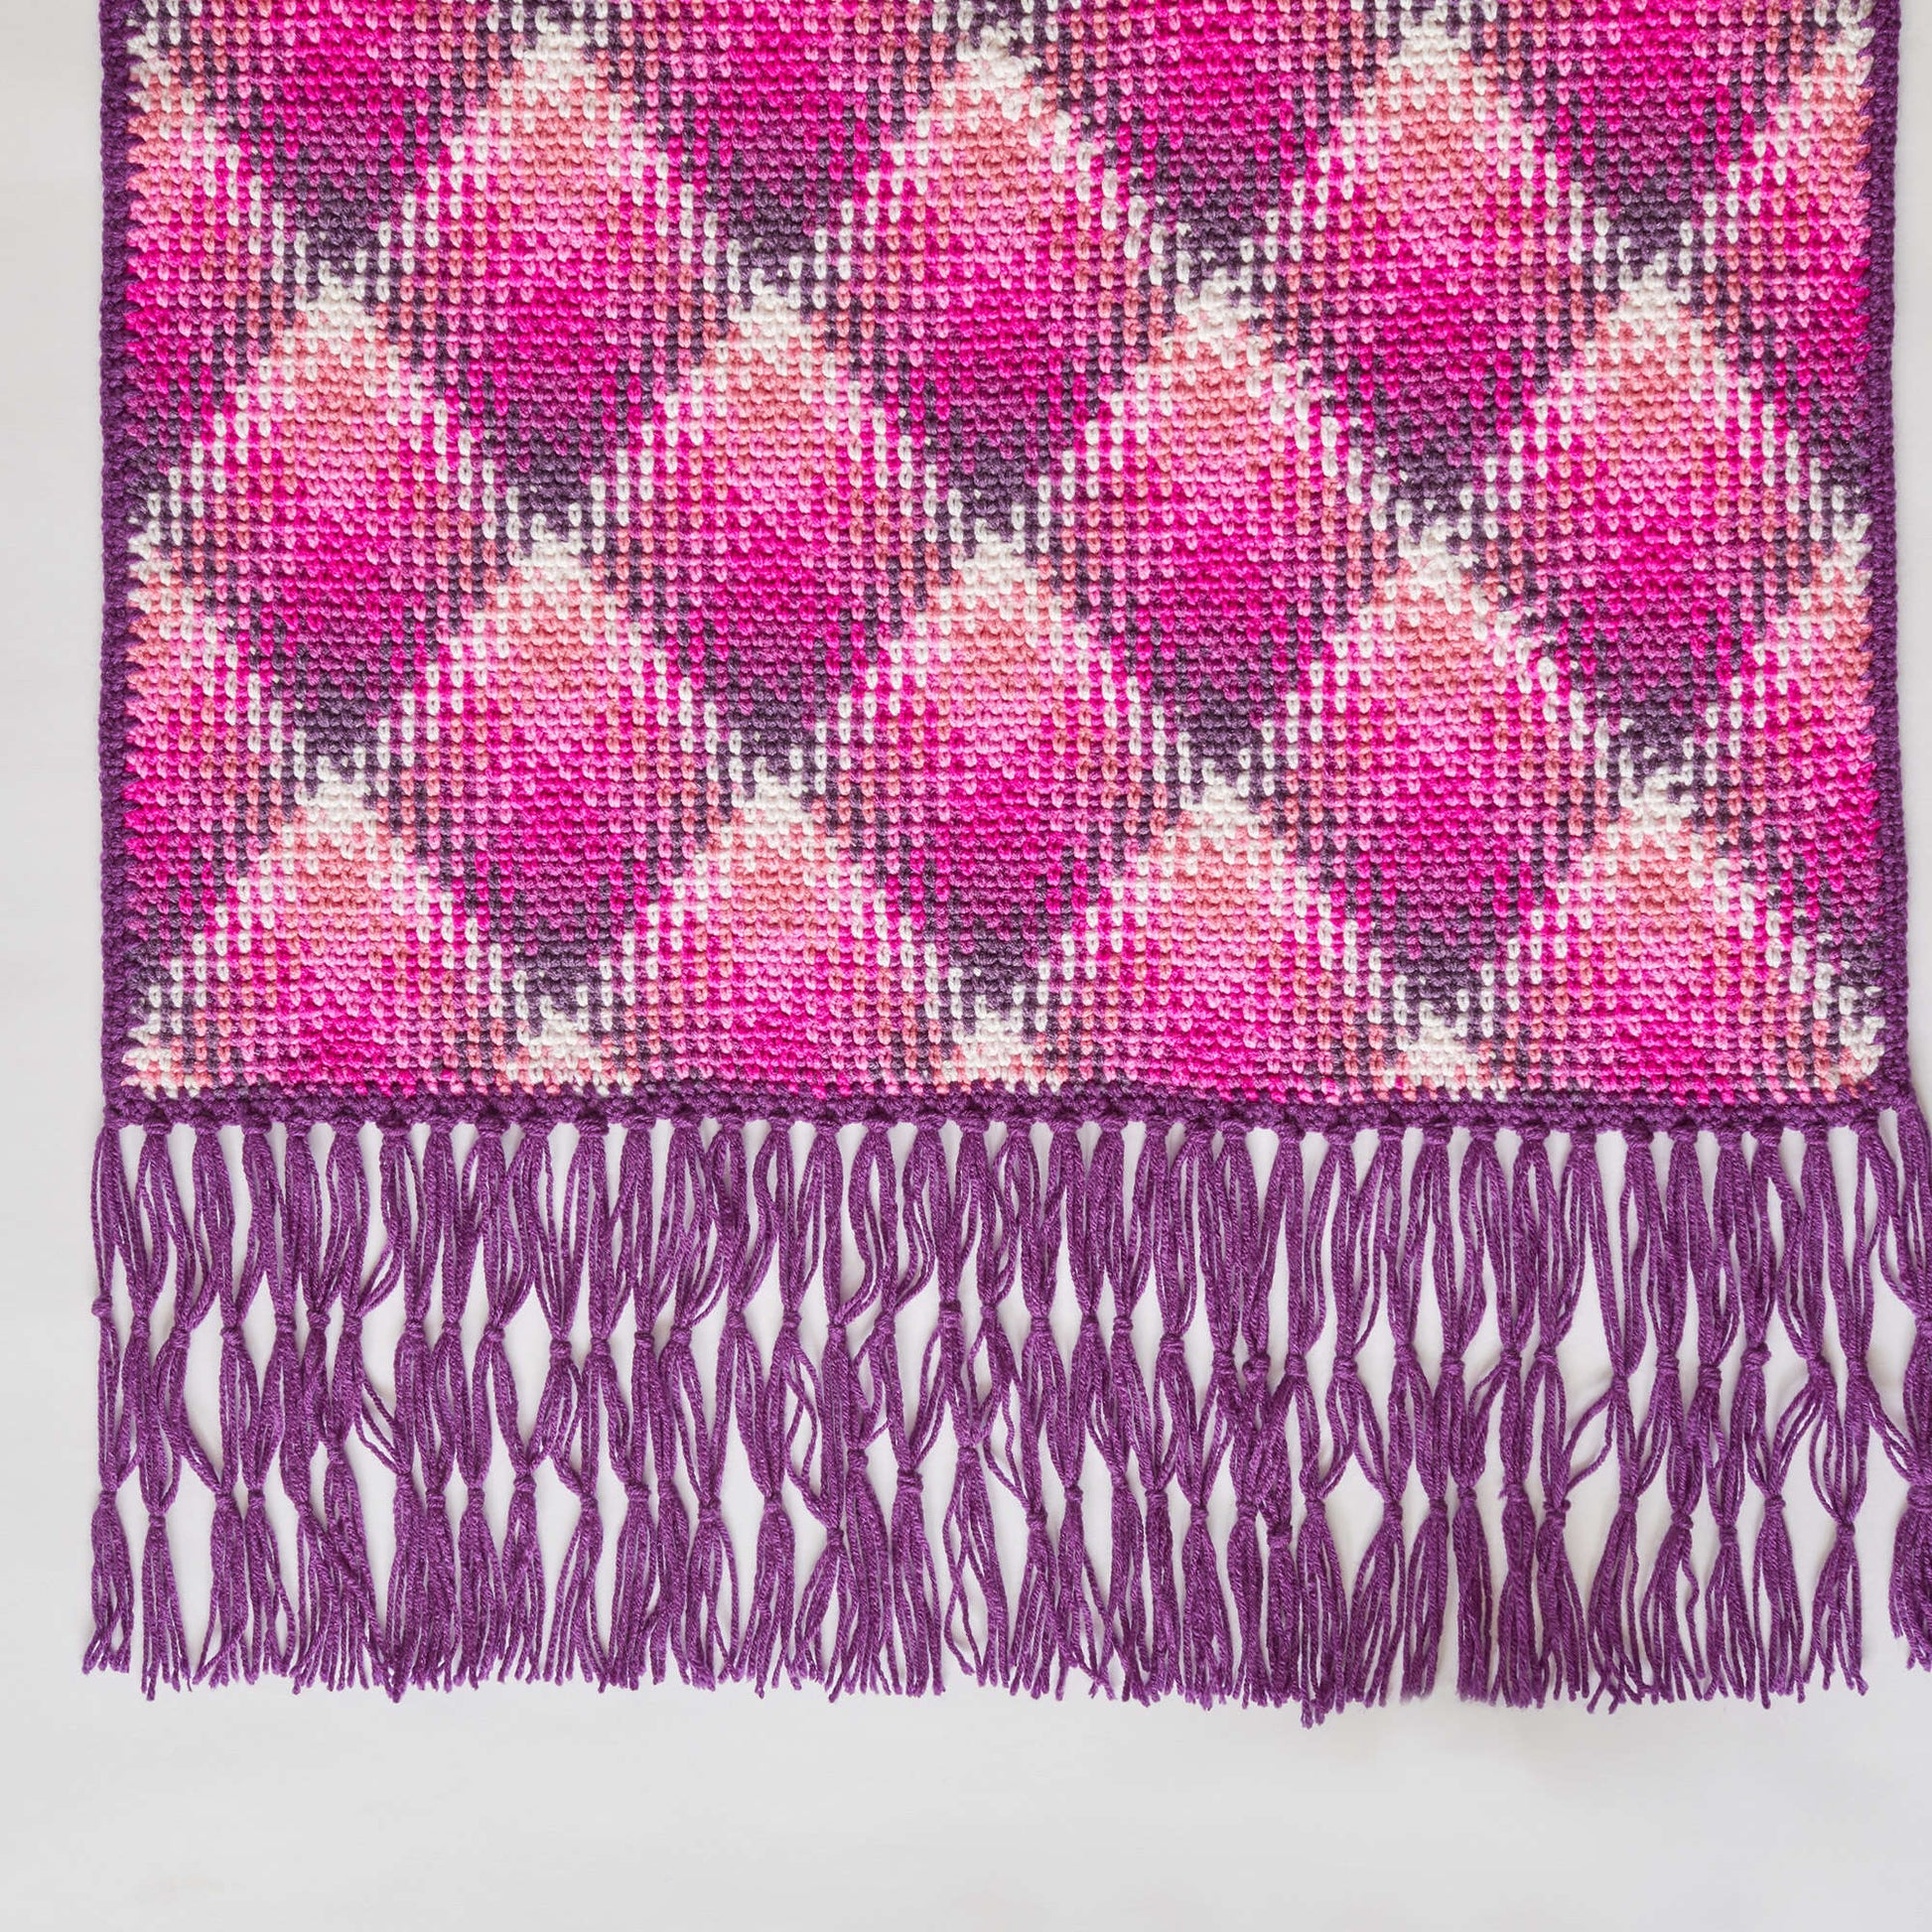 A Walker in the City Scarf: planned color pooling